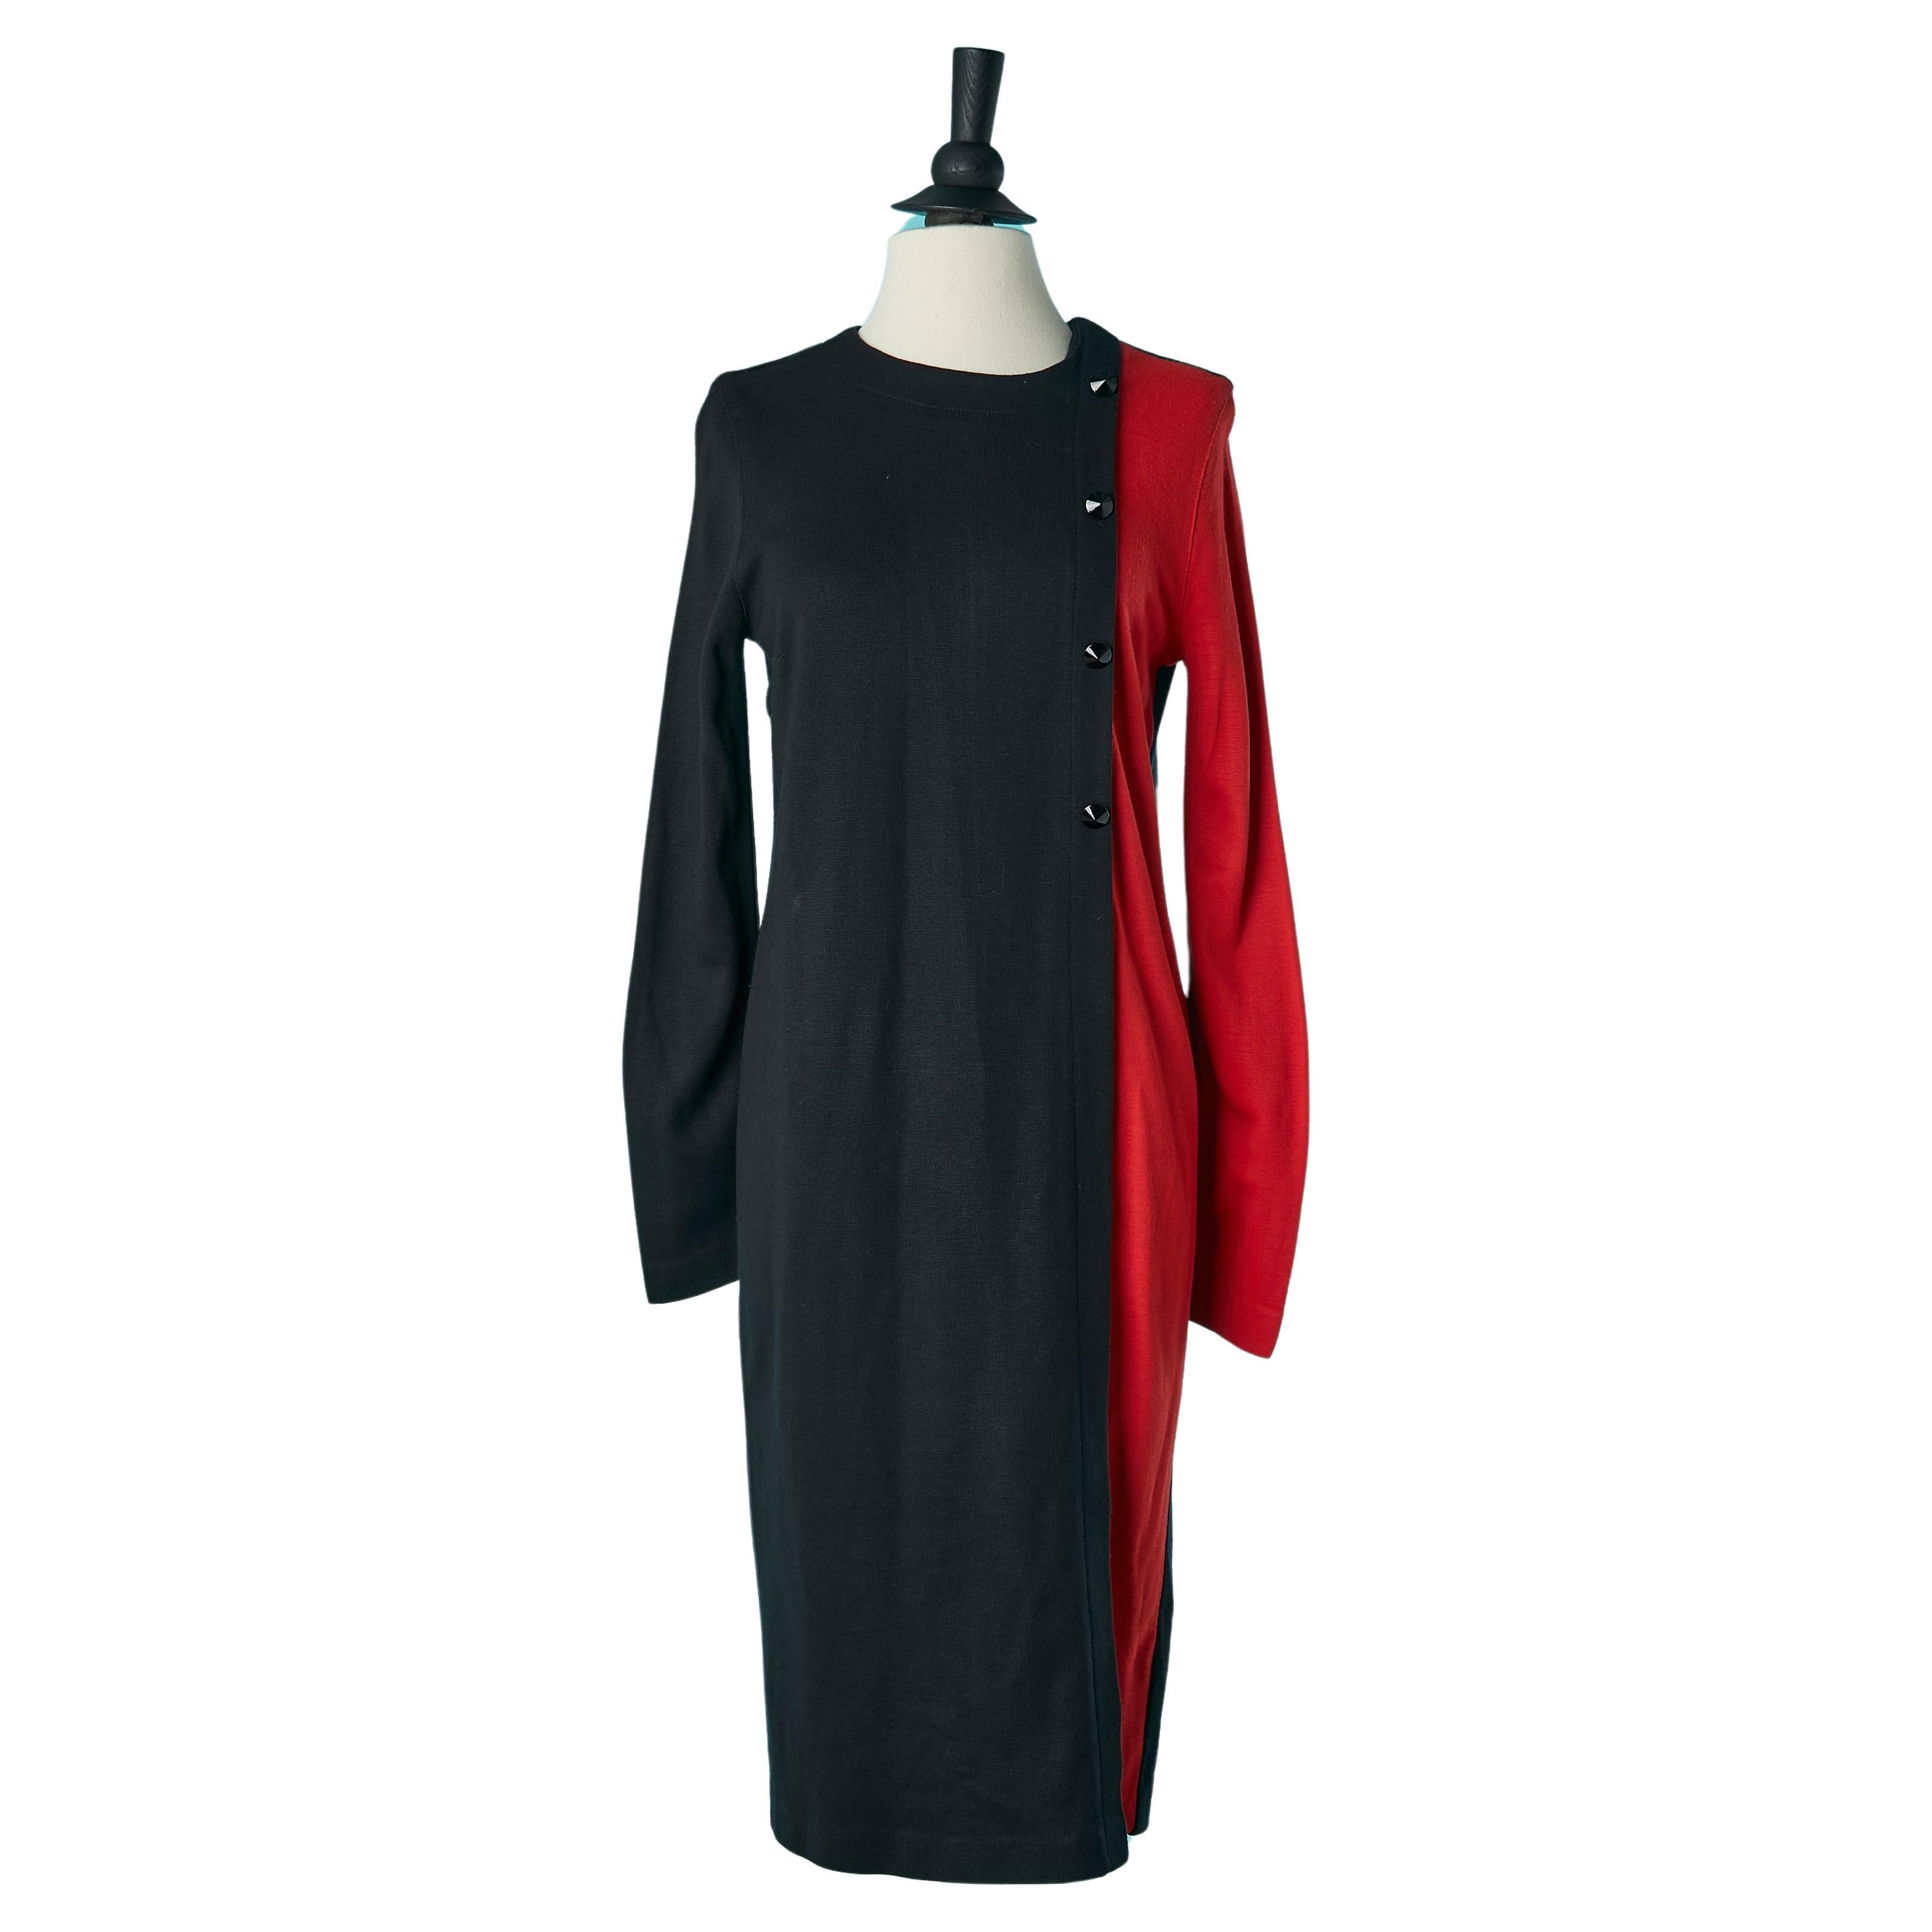 Black and red jersey dress with decorative buttons Pierre Cardin 600€ For Sale